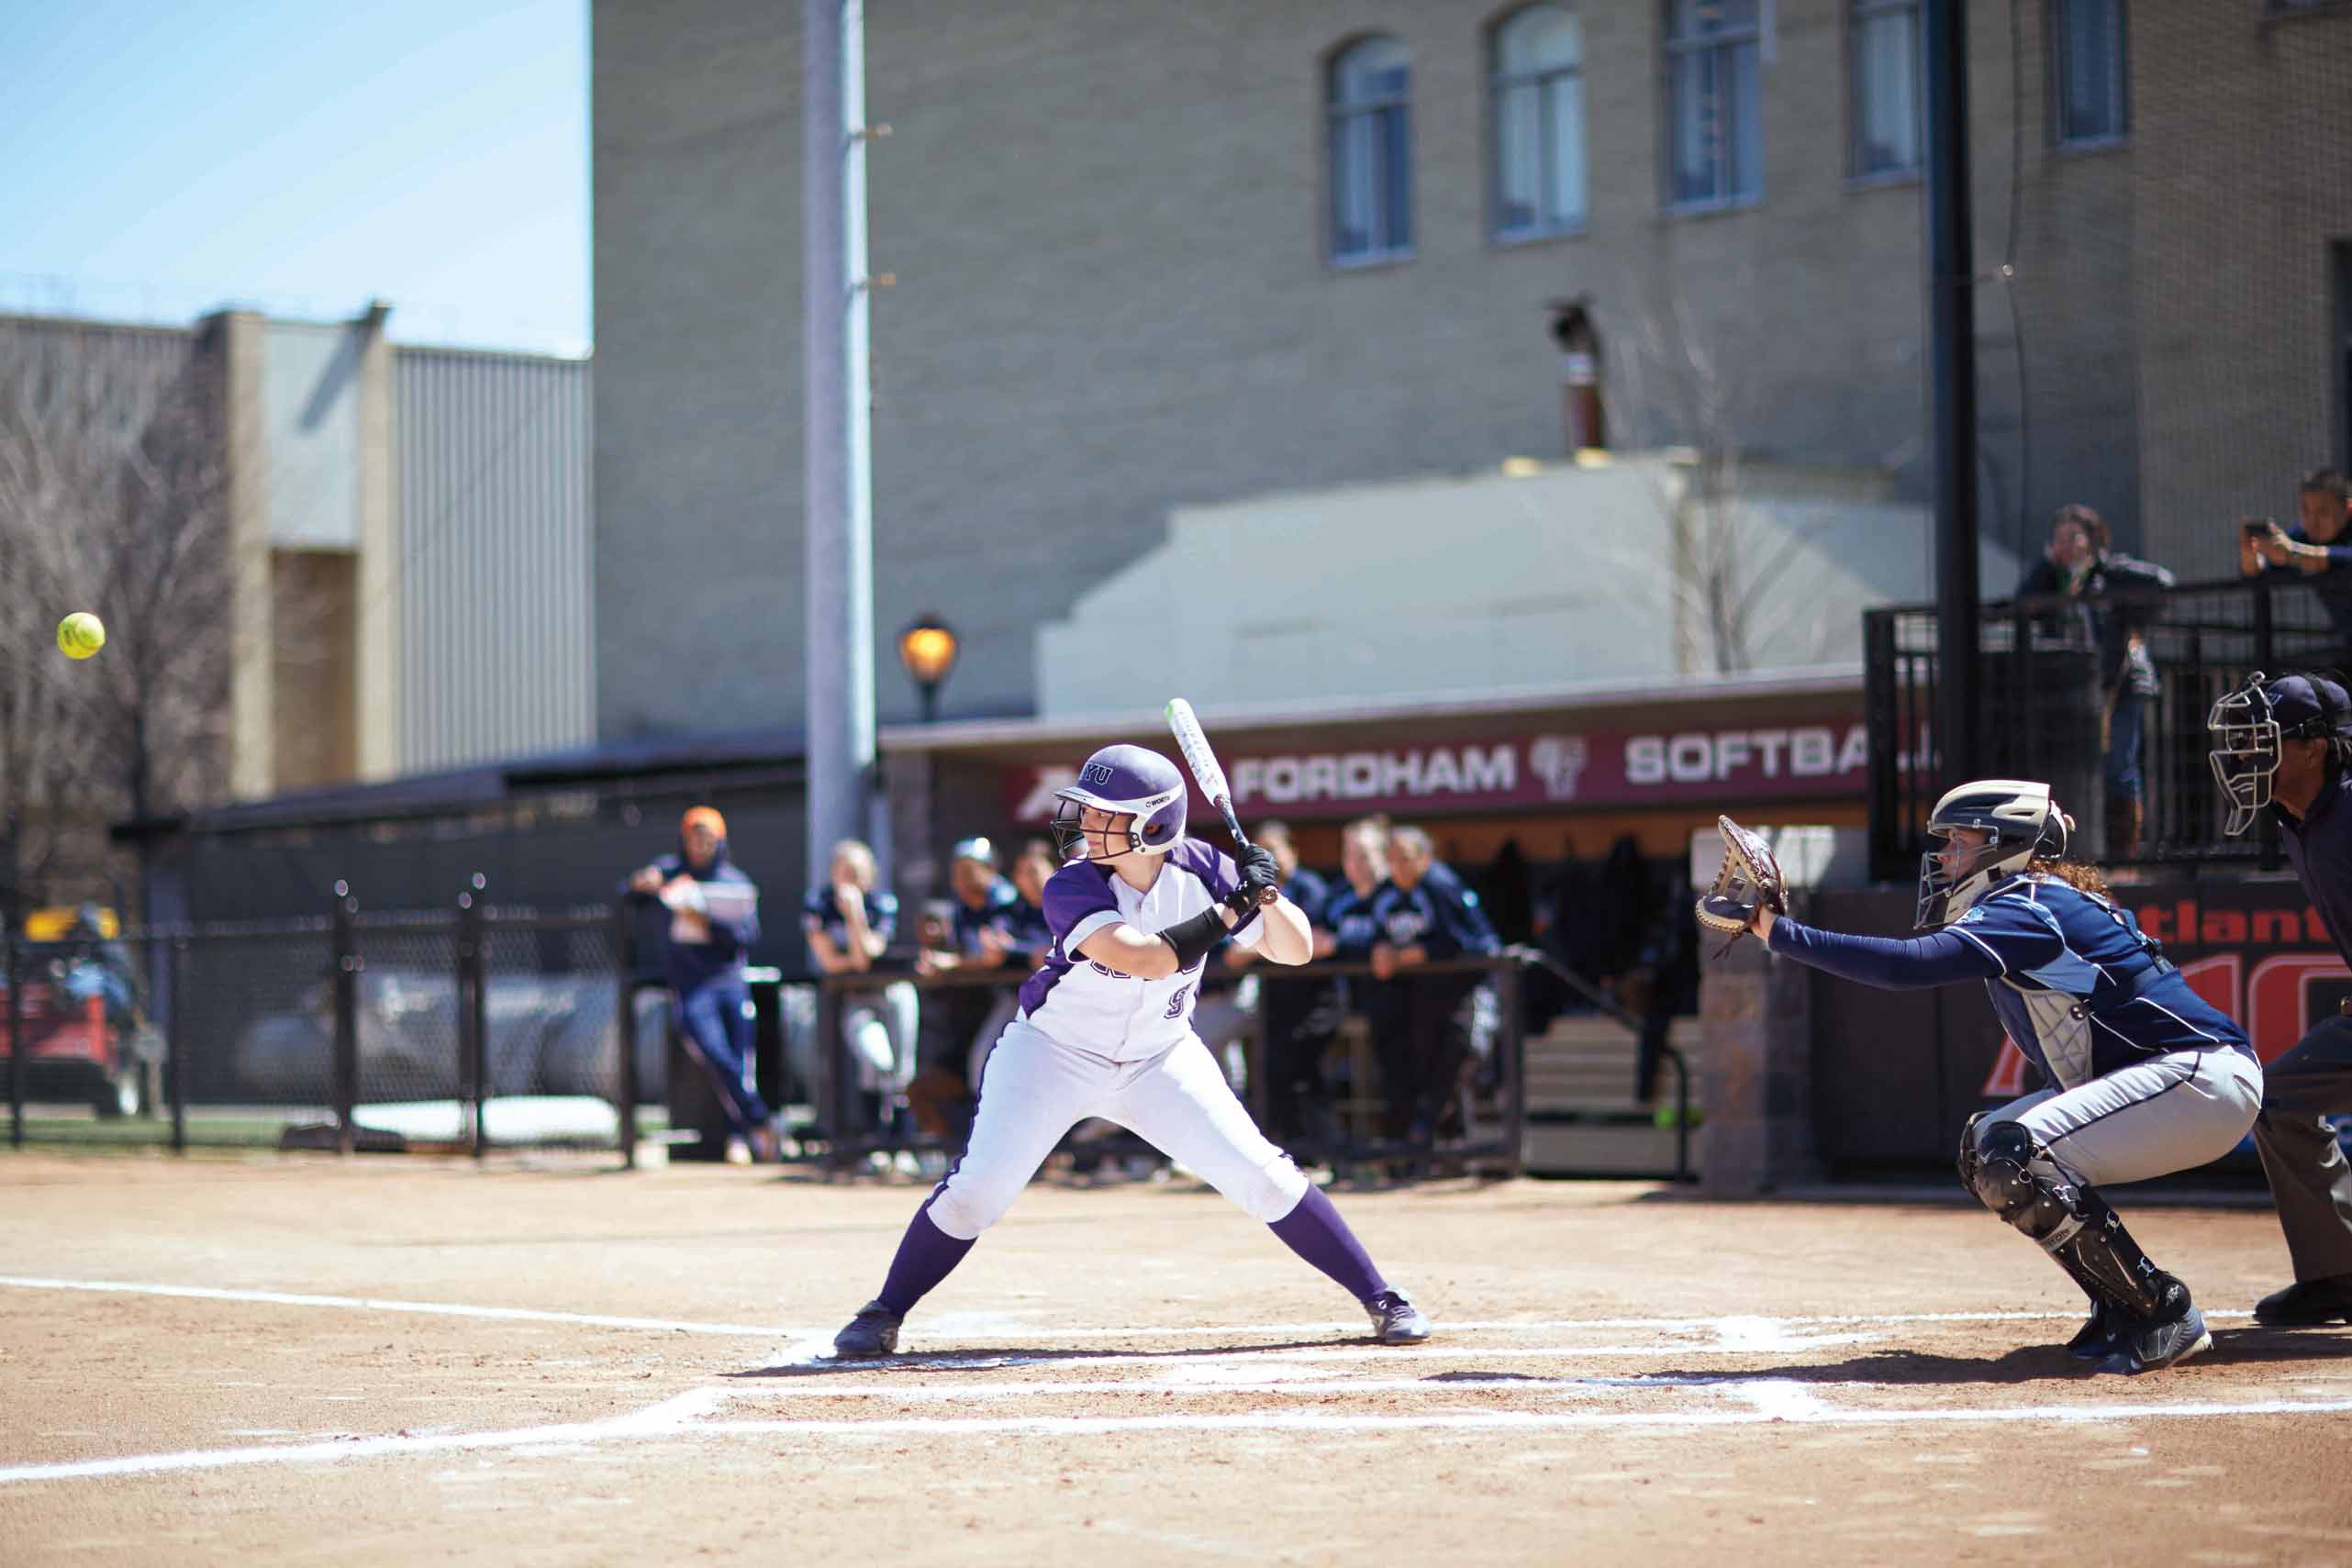 NYU softball player at the plate, holding a bat ready to swing.